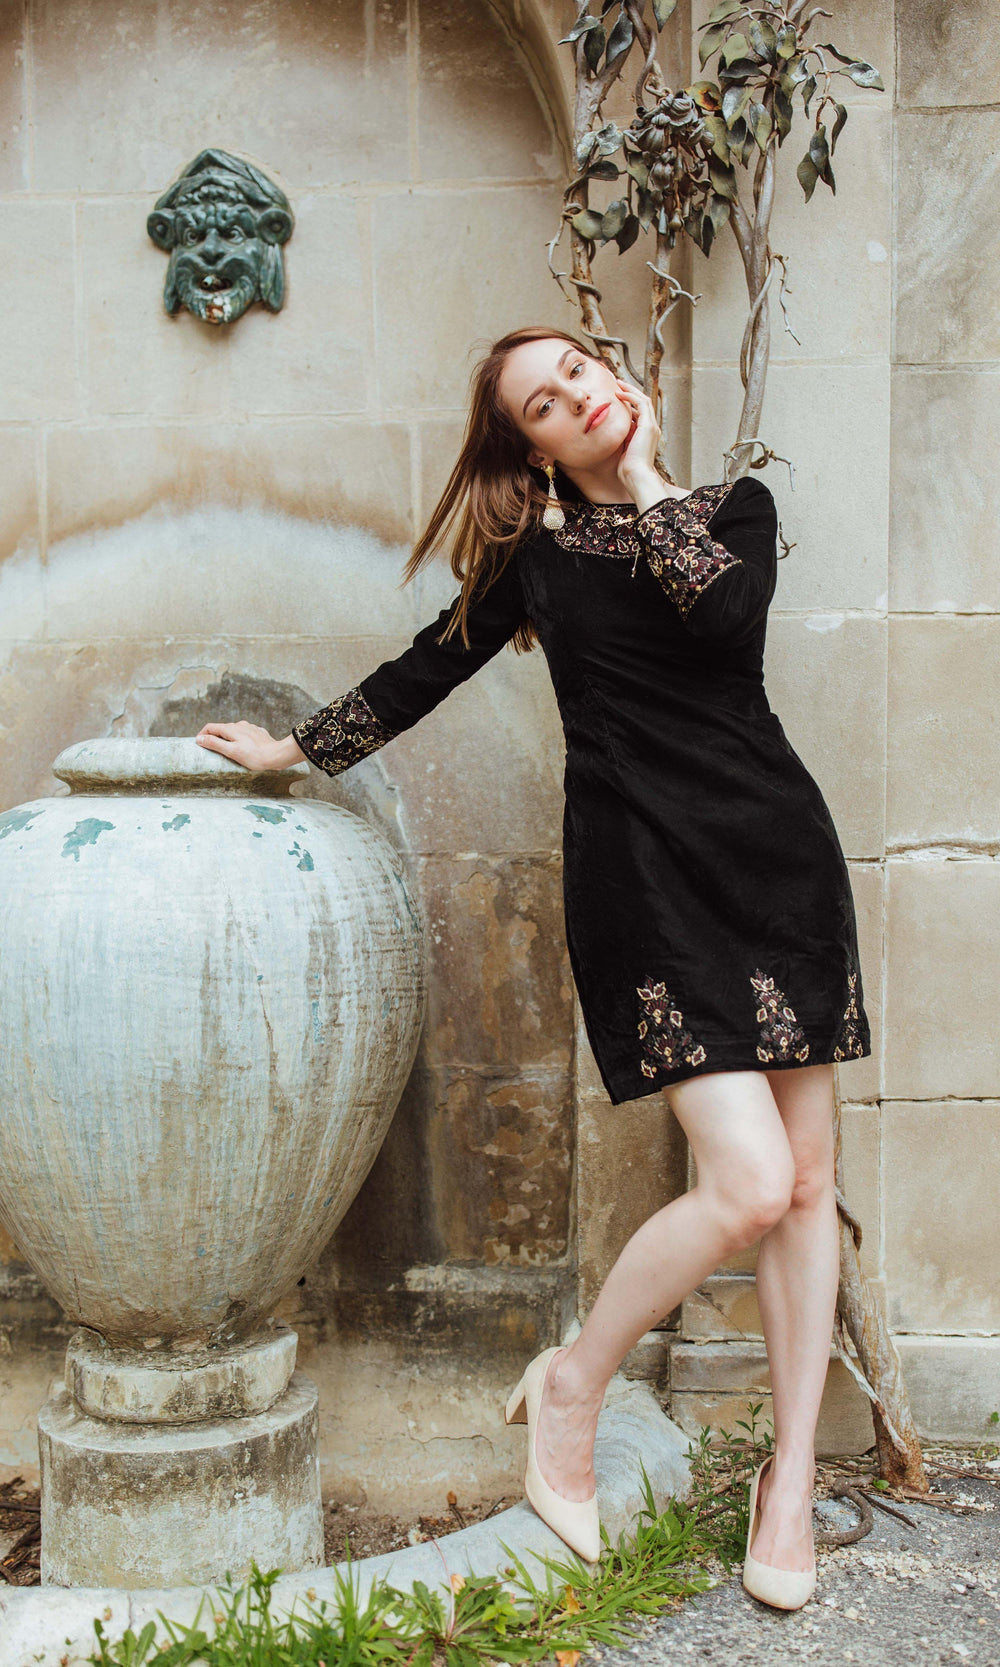 D1055 black dress with hand embroidery-dresses-[Tunics]-[Womens Tops]-[Croptops]